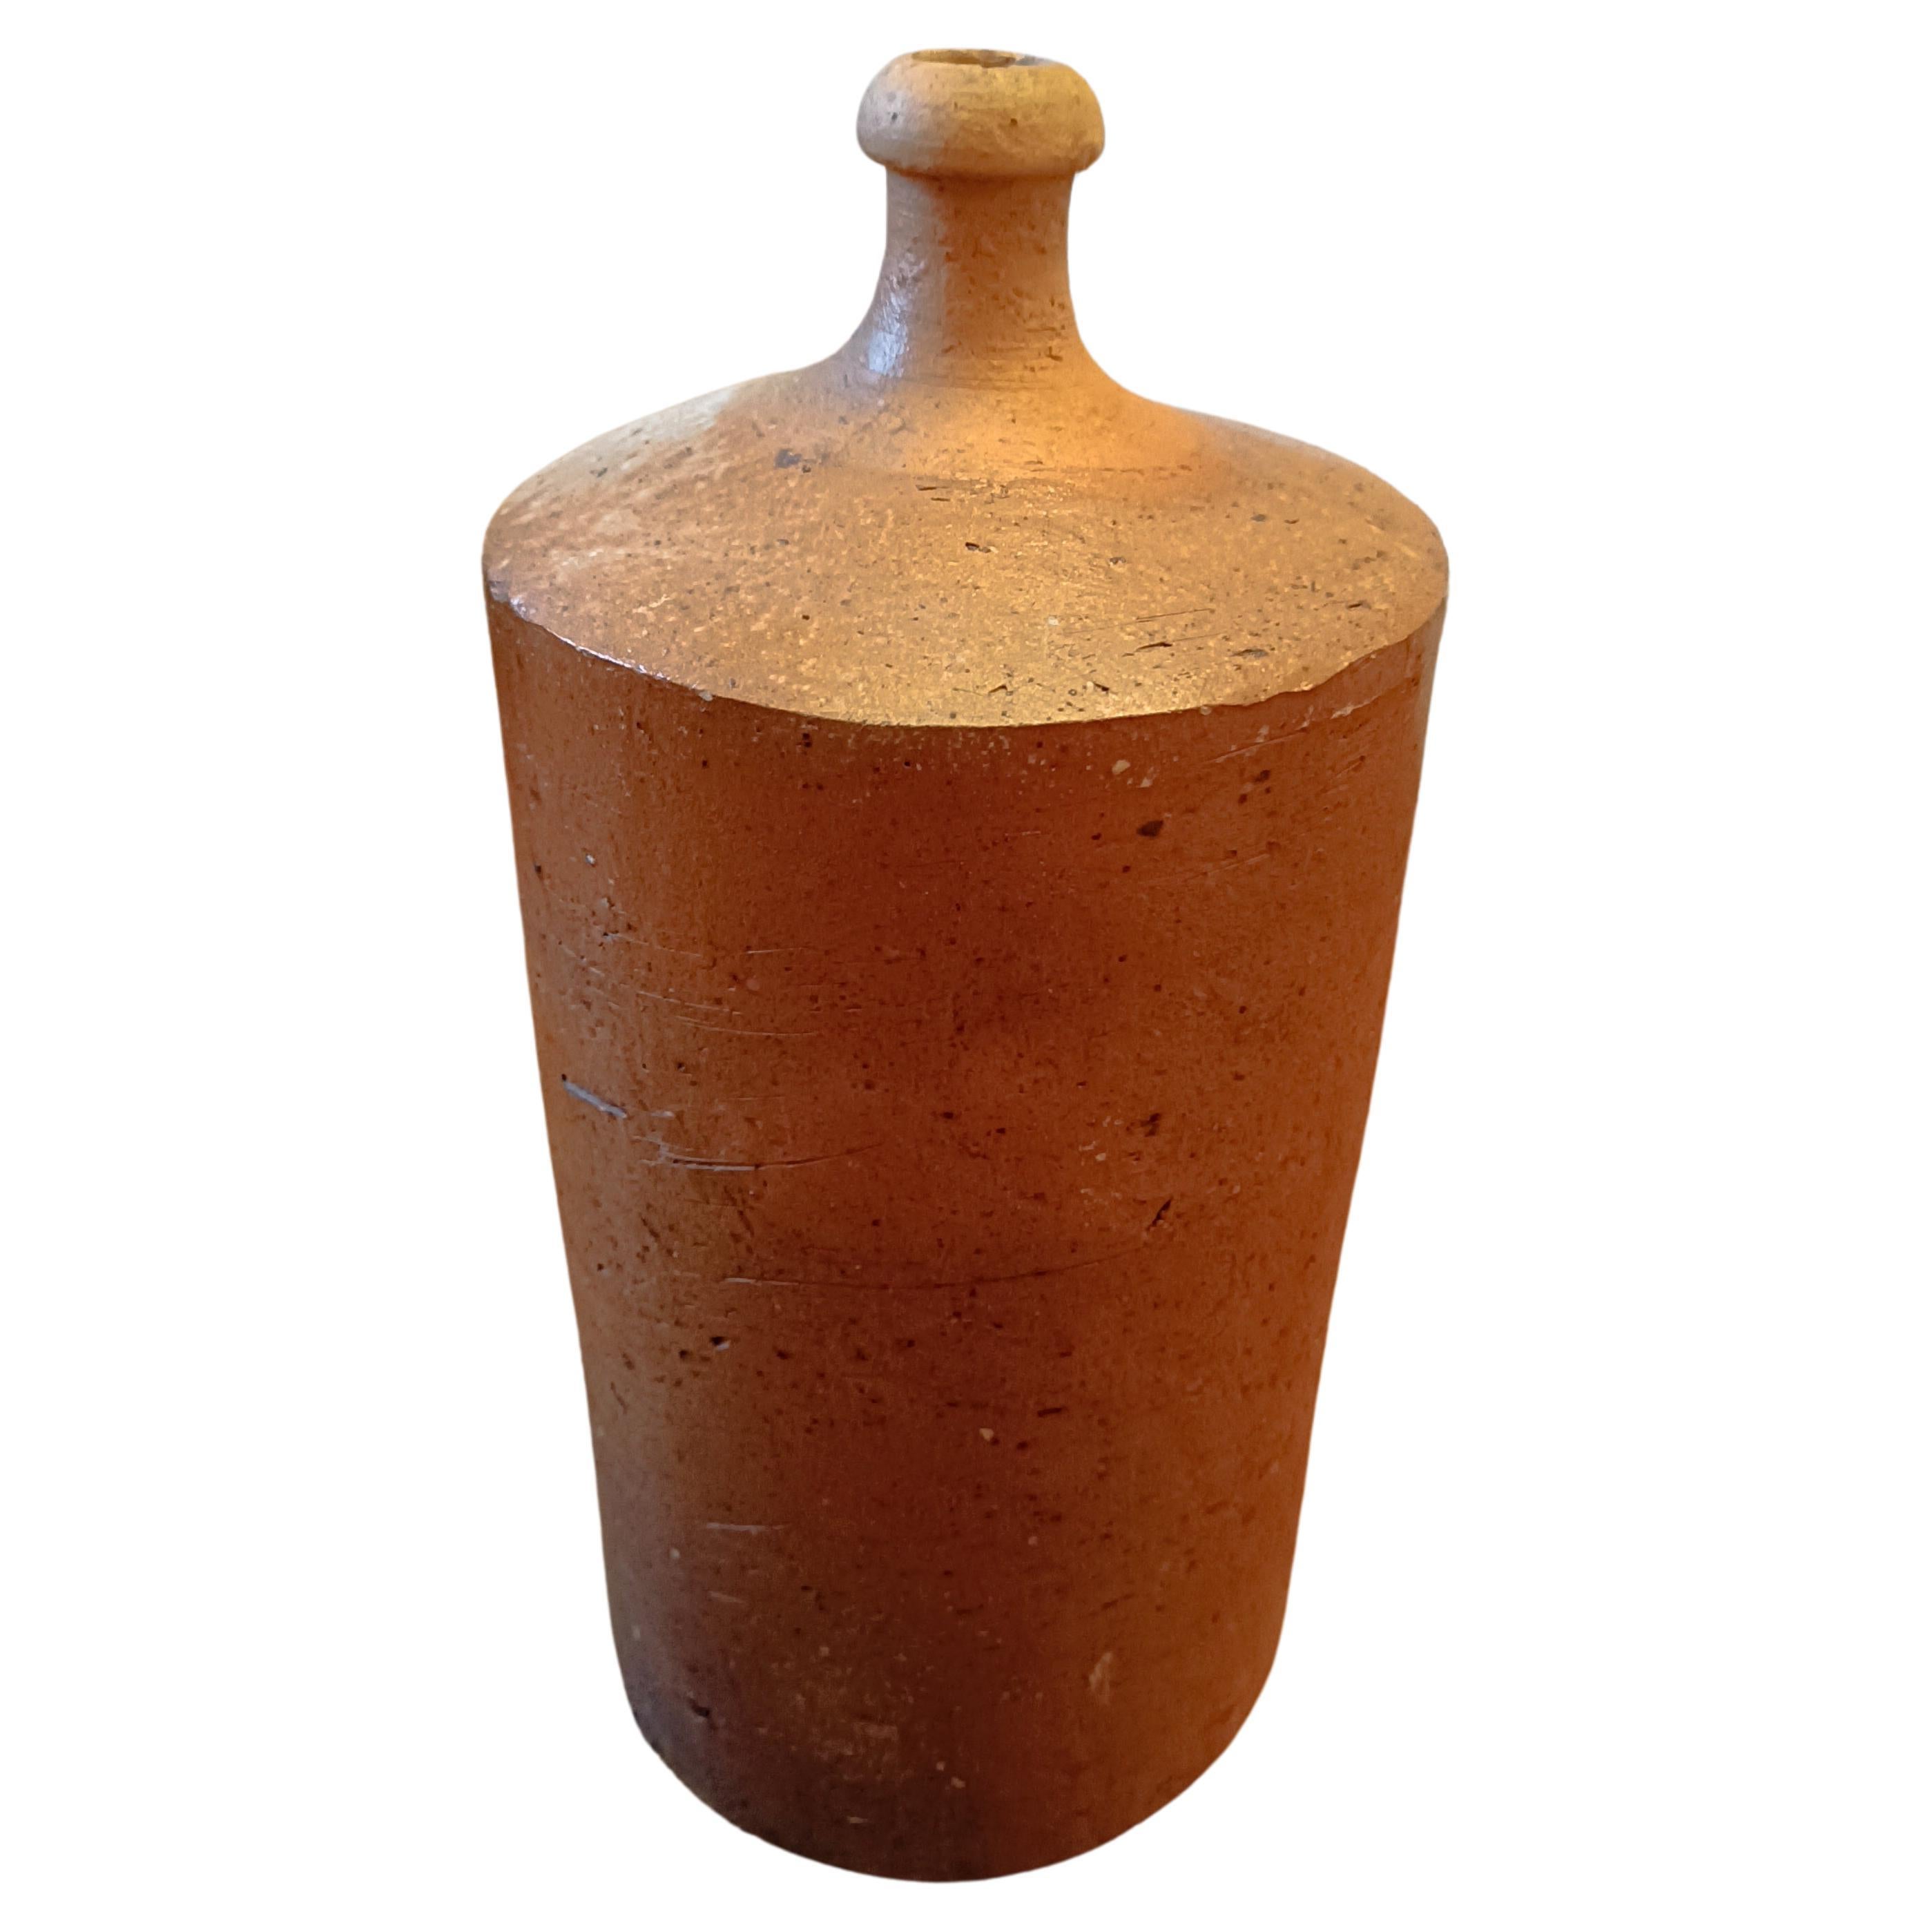 Massive french earthenware bottle, late 19th century - terracotta bottle

Superb old terracotta bottle.
Its circular shape and rough texture make it a beautiful and original piece.
It is in goodcondition.

Its height is 37 cm. Its diameter is 18